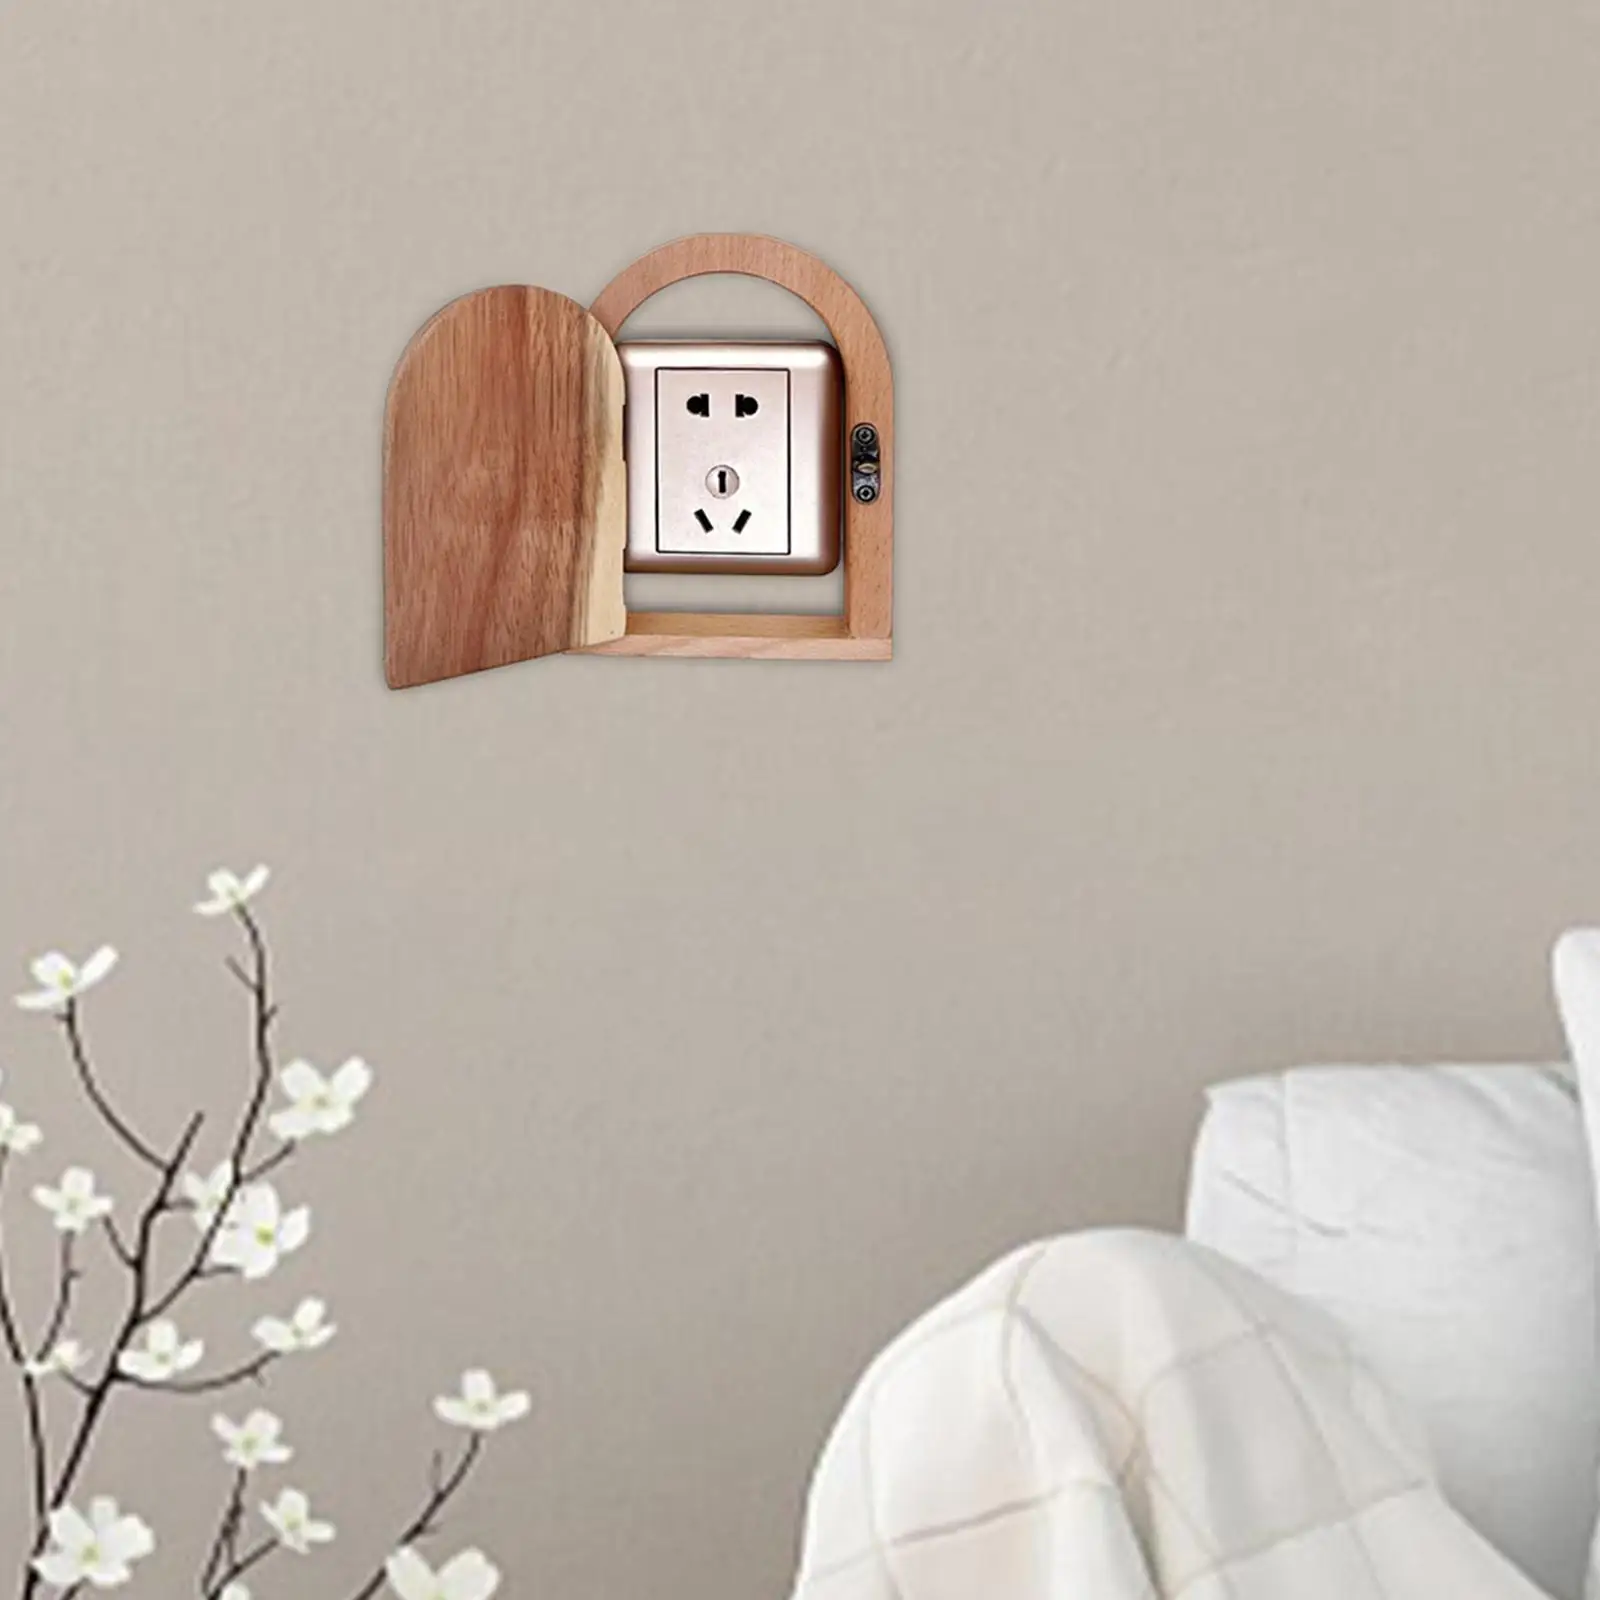 Outlet Covers Wooden Protective Switch Box Waterproof Socket Protectors for Warehouse Living Room Office Bedroom Power Outlet